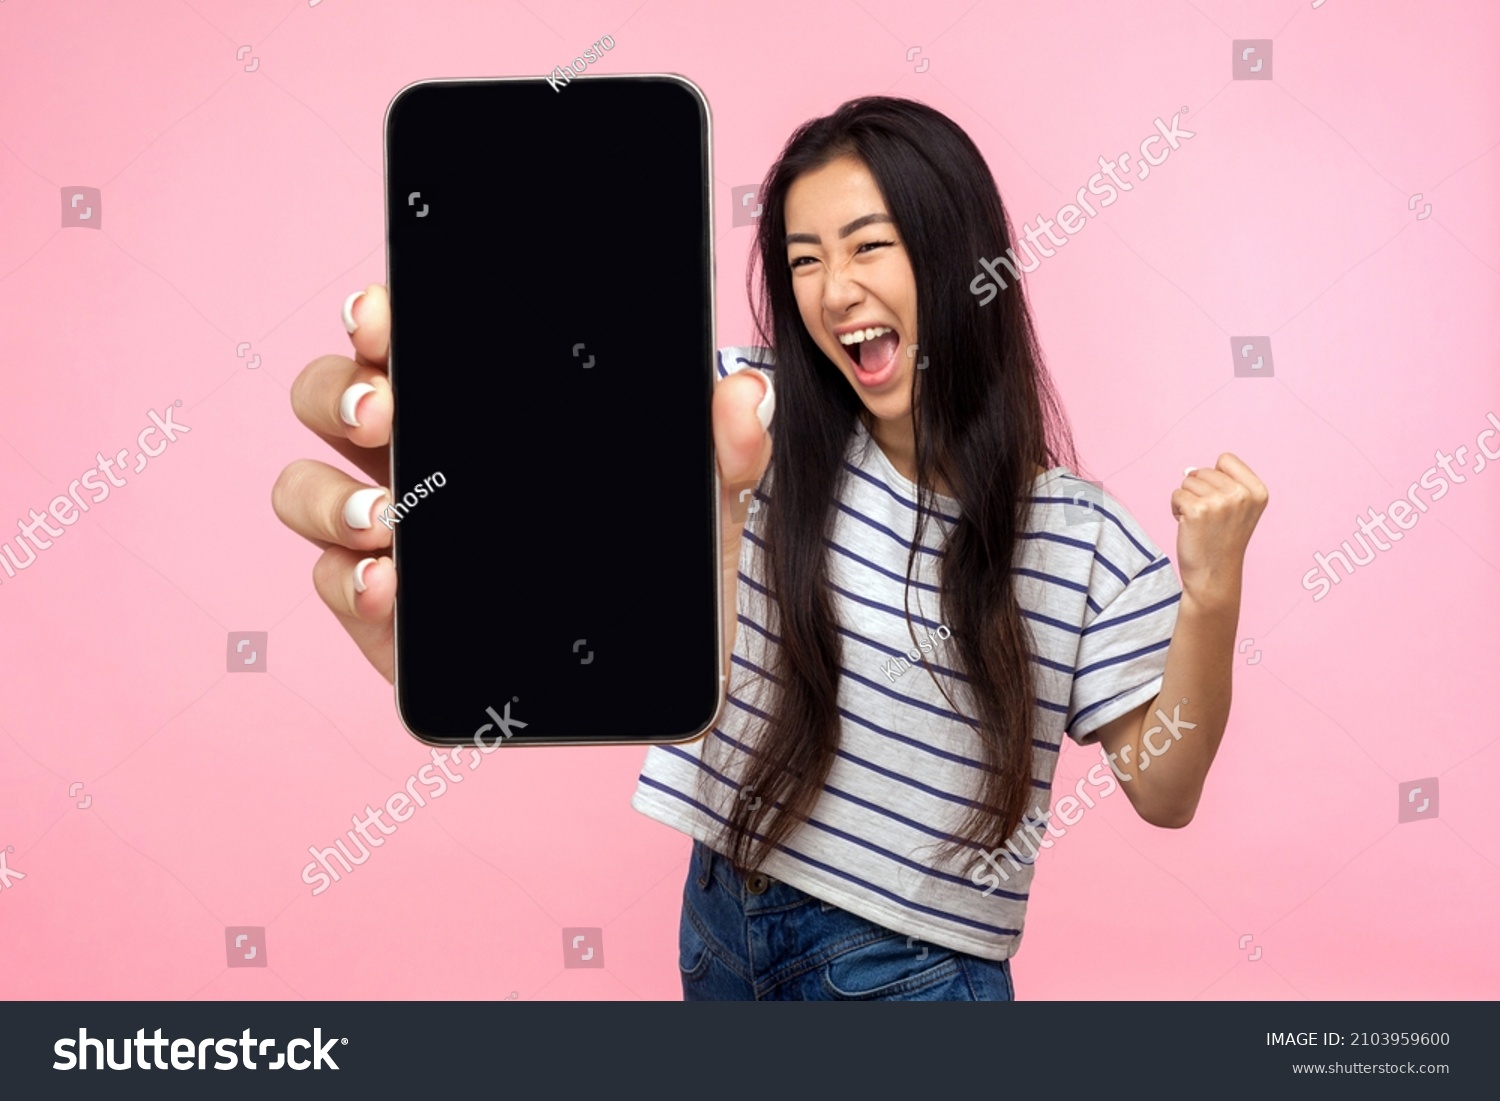 Portrait of euphoric happy joyful girl with long hair screaming with happiness showing mobile advertisement mockup area and celebrating her victory. indoor studio shot isolated on pink background #2103959600